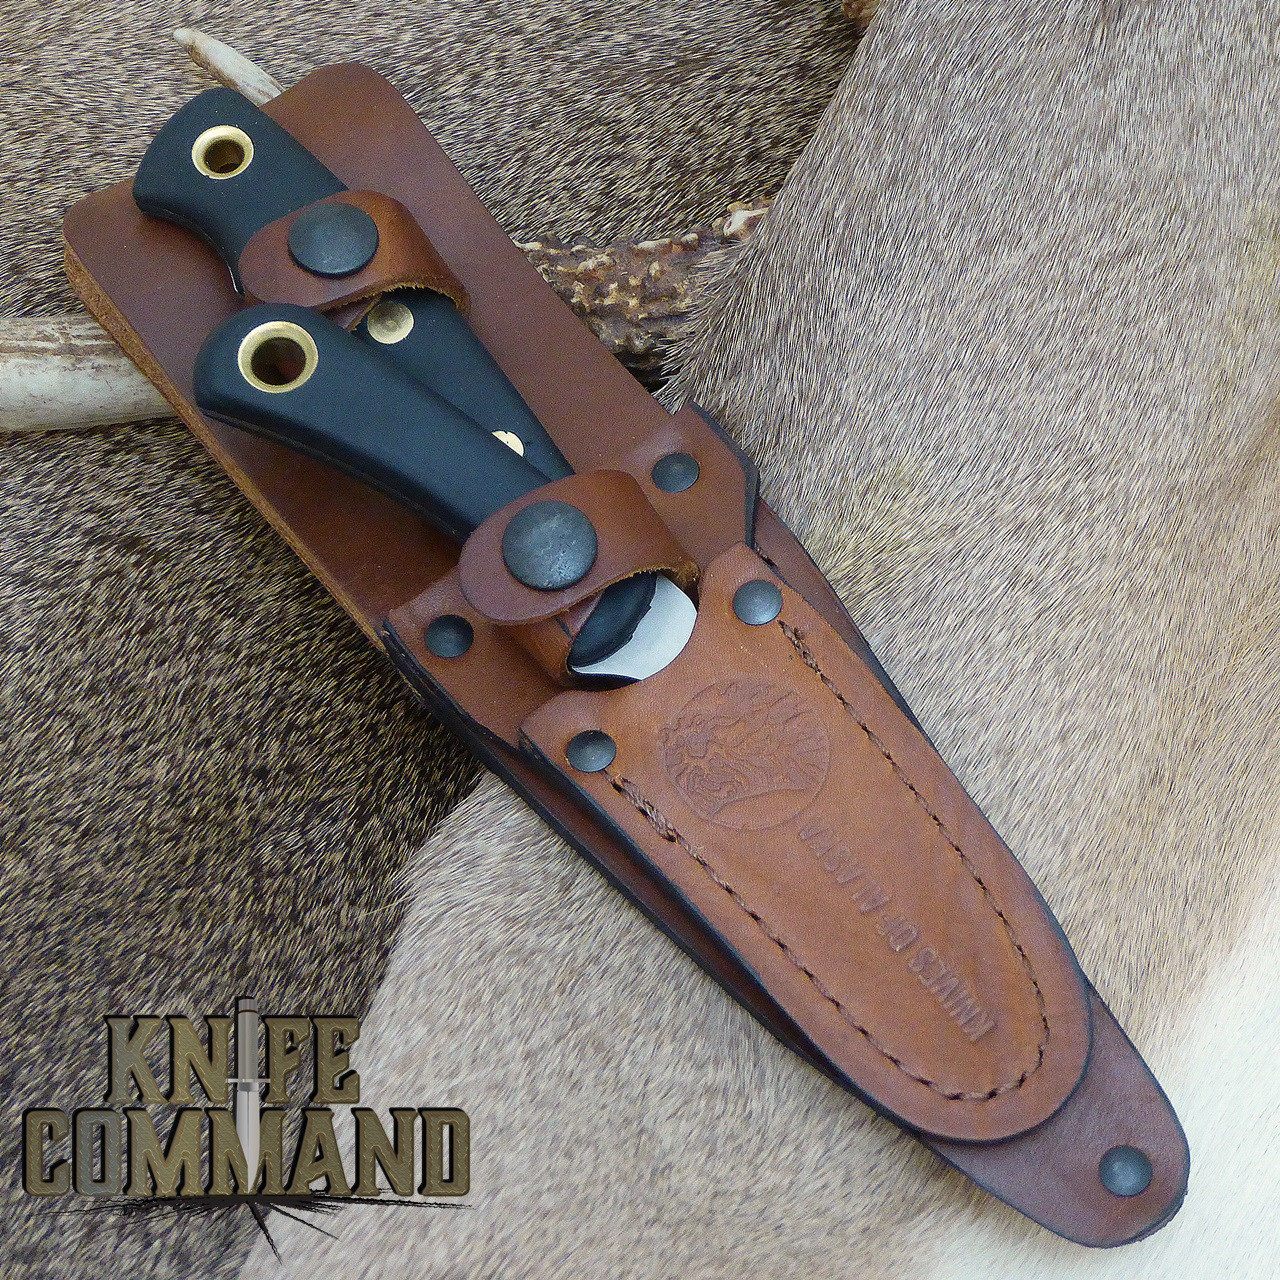 Both carried in one sheath.